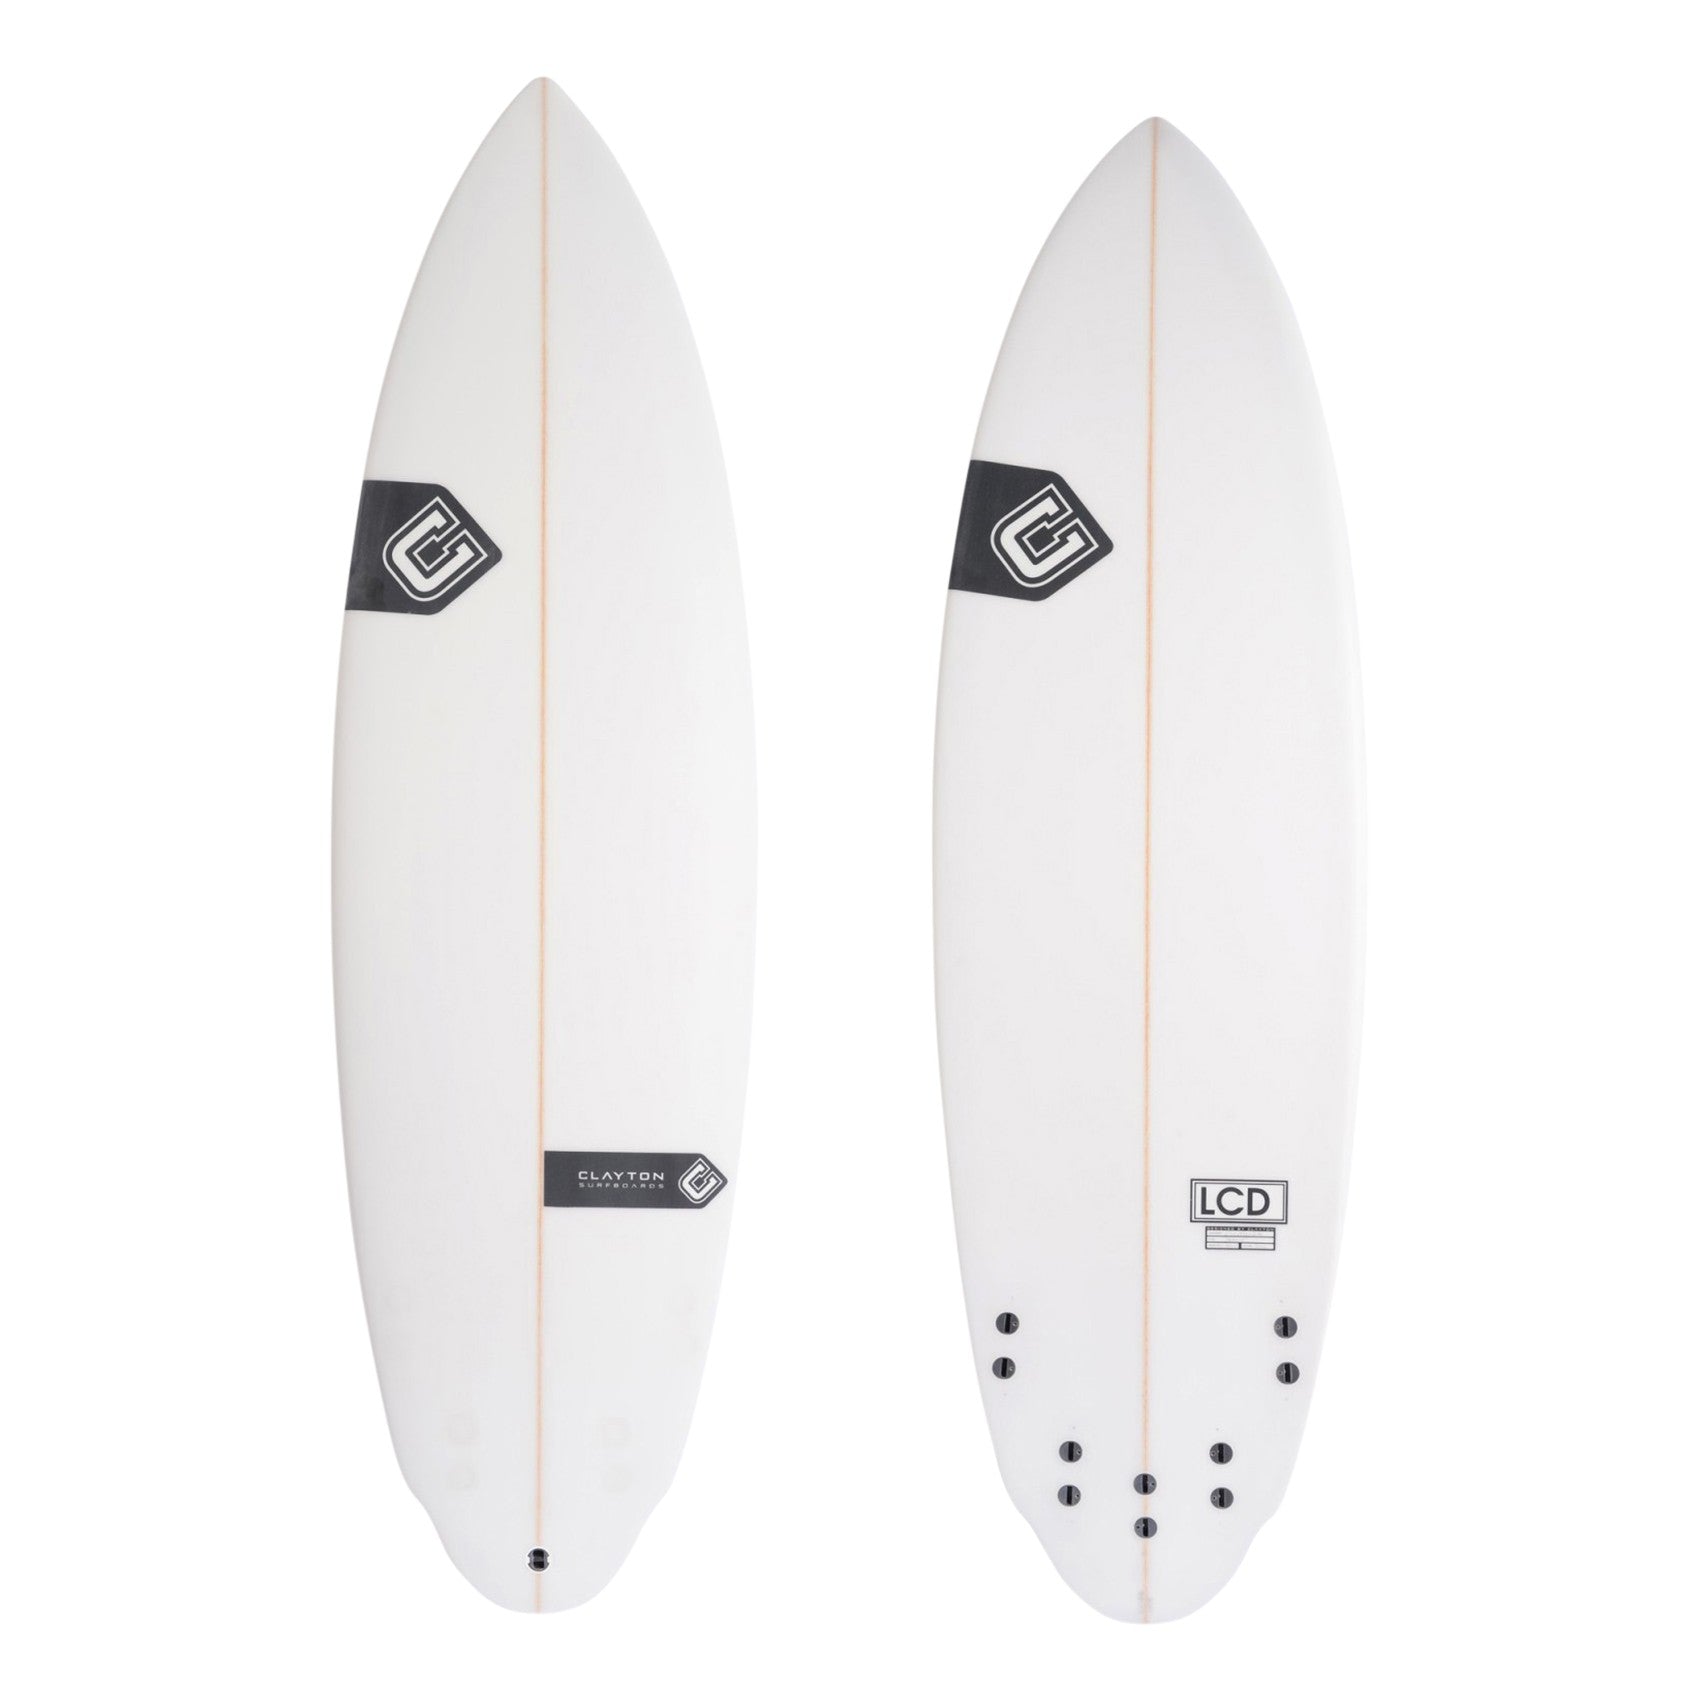 CLAYTON Surfboards - LCD (5 ends) (PU)